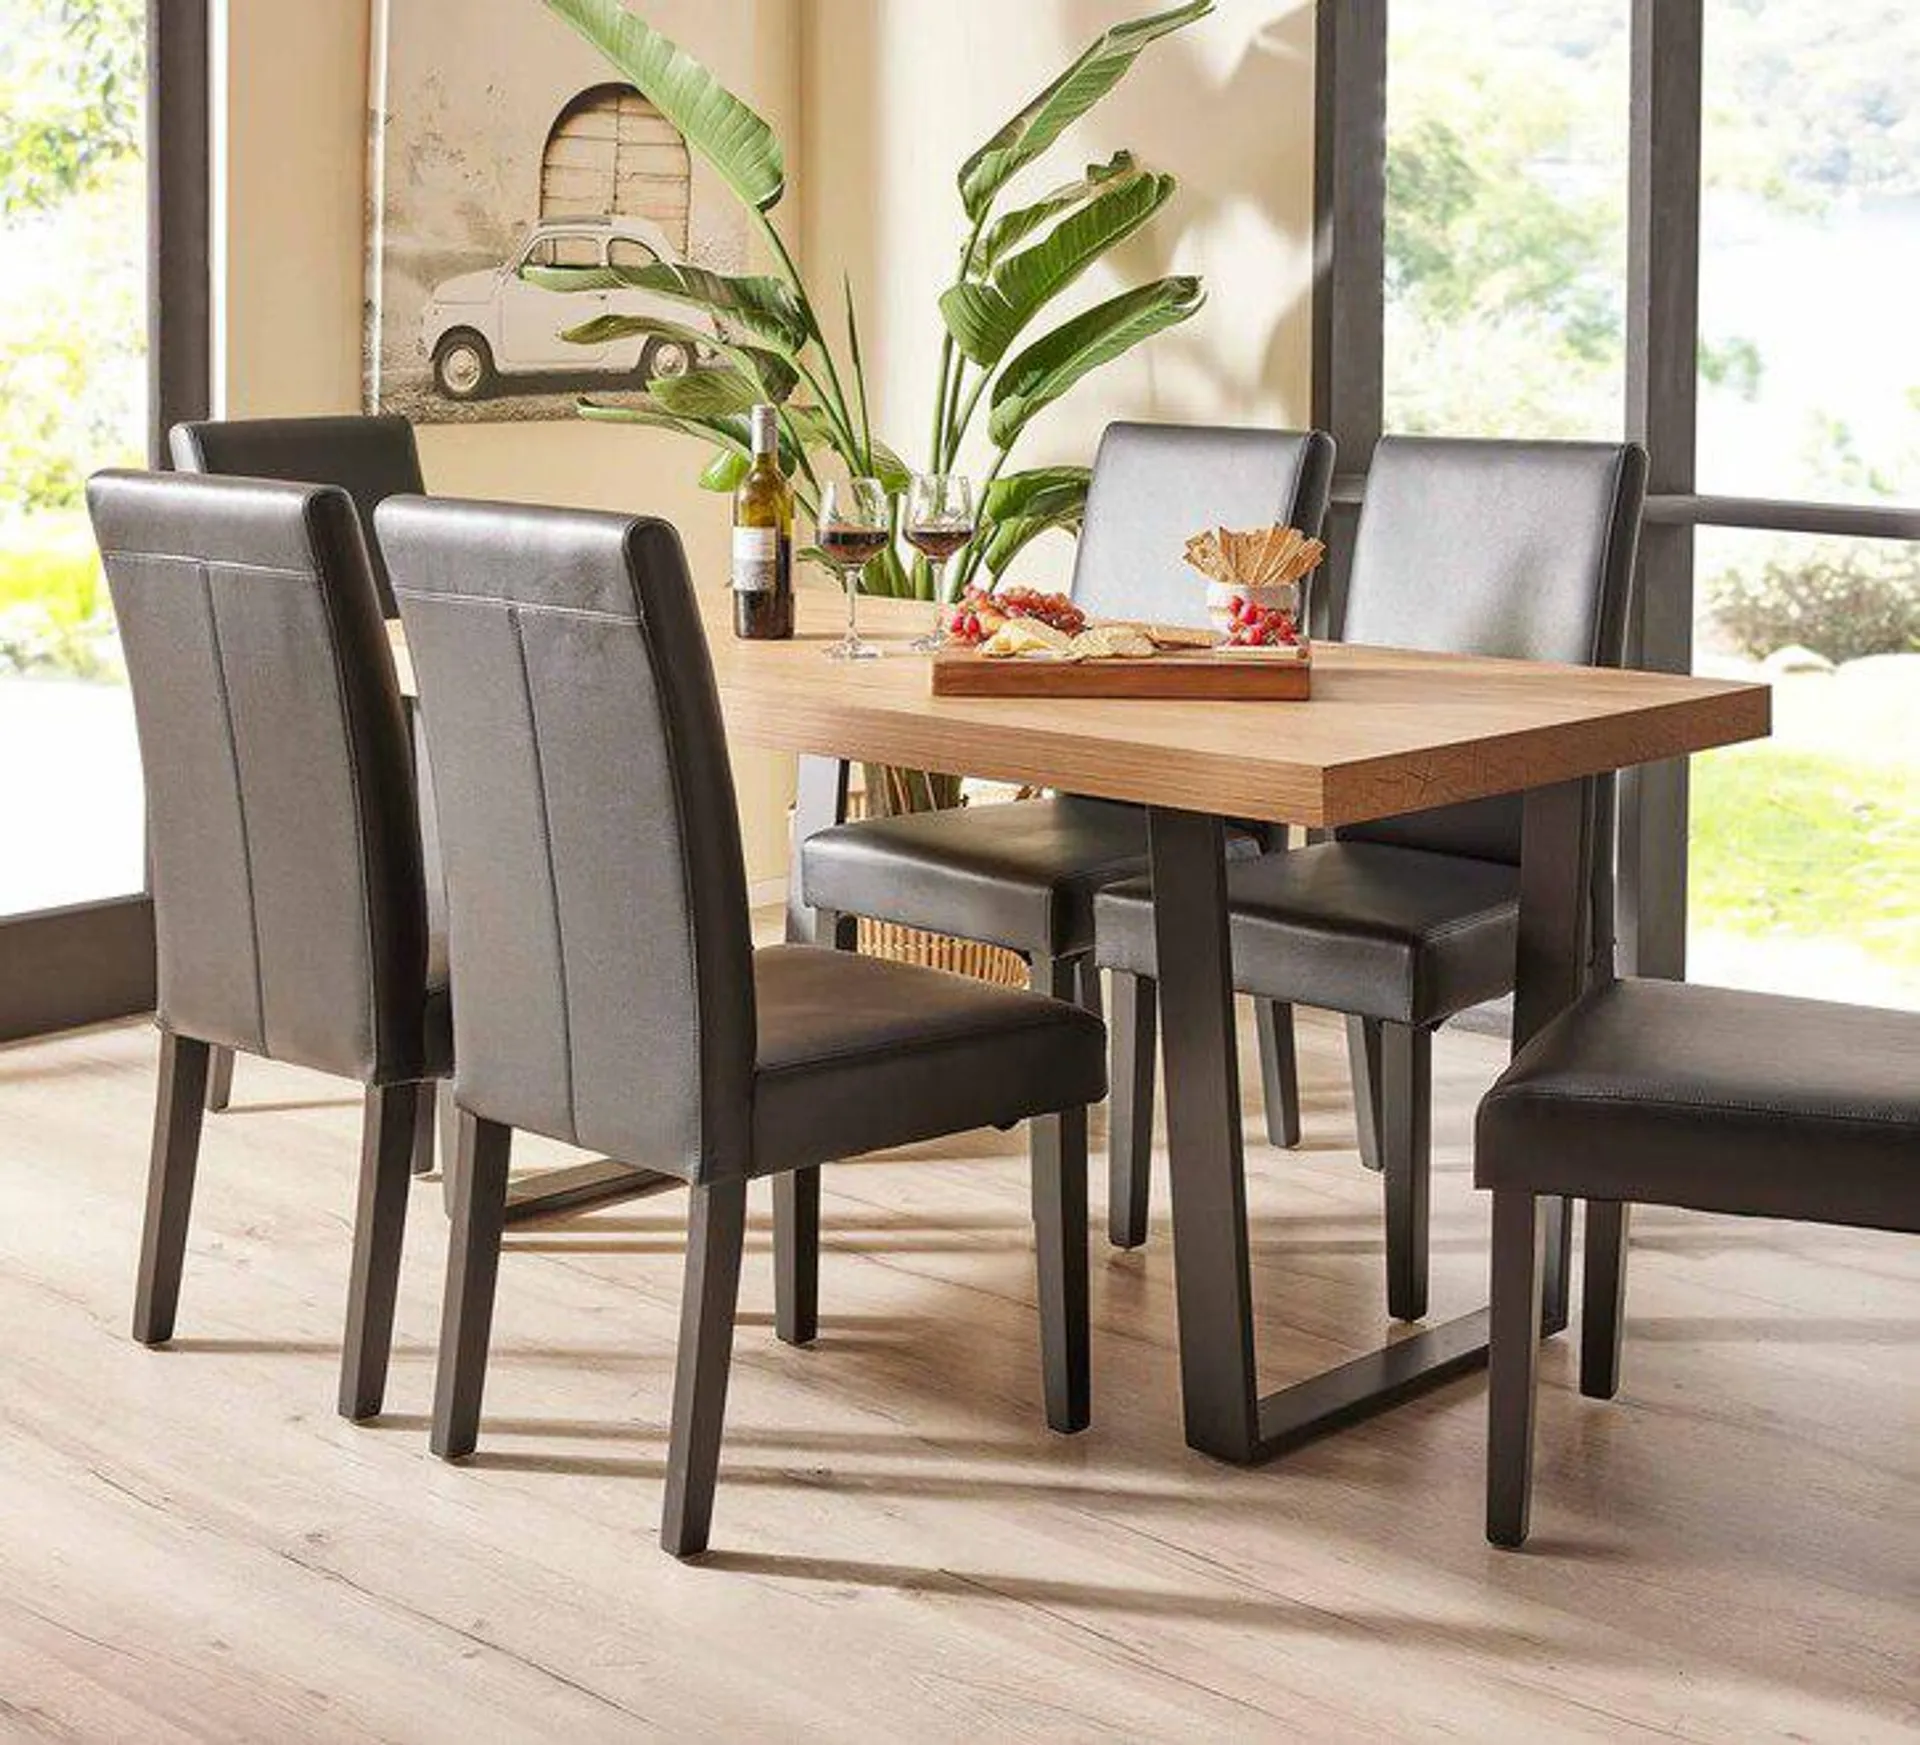 Bridge 6 Seater Dining Set With Avenue Chairs